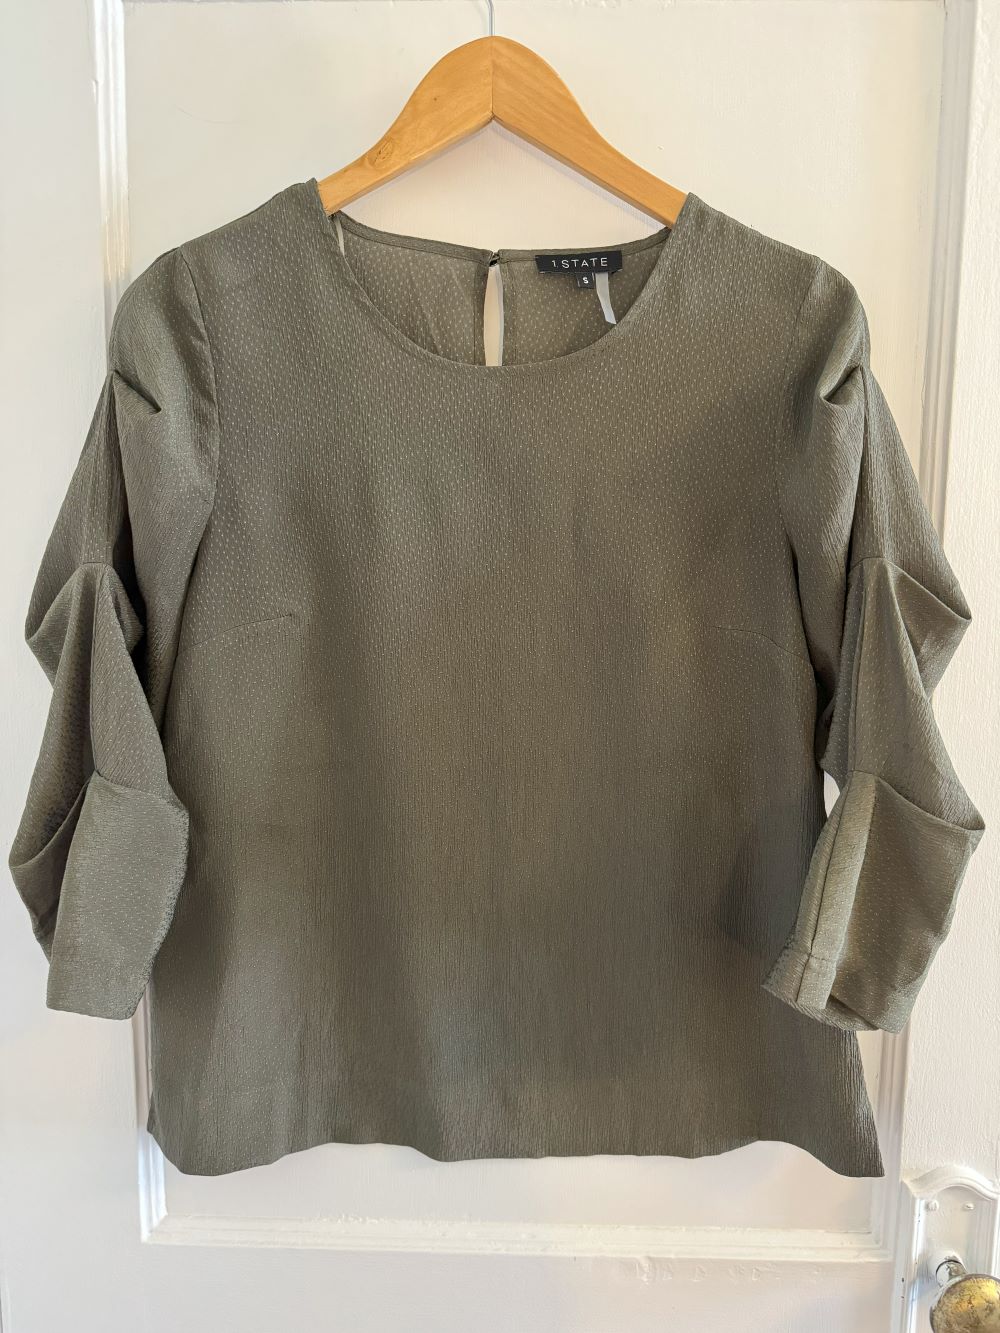 * Reduced * 1. State (Nordstrom) Olive Green Blouse, Women's Small